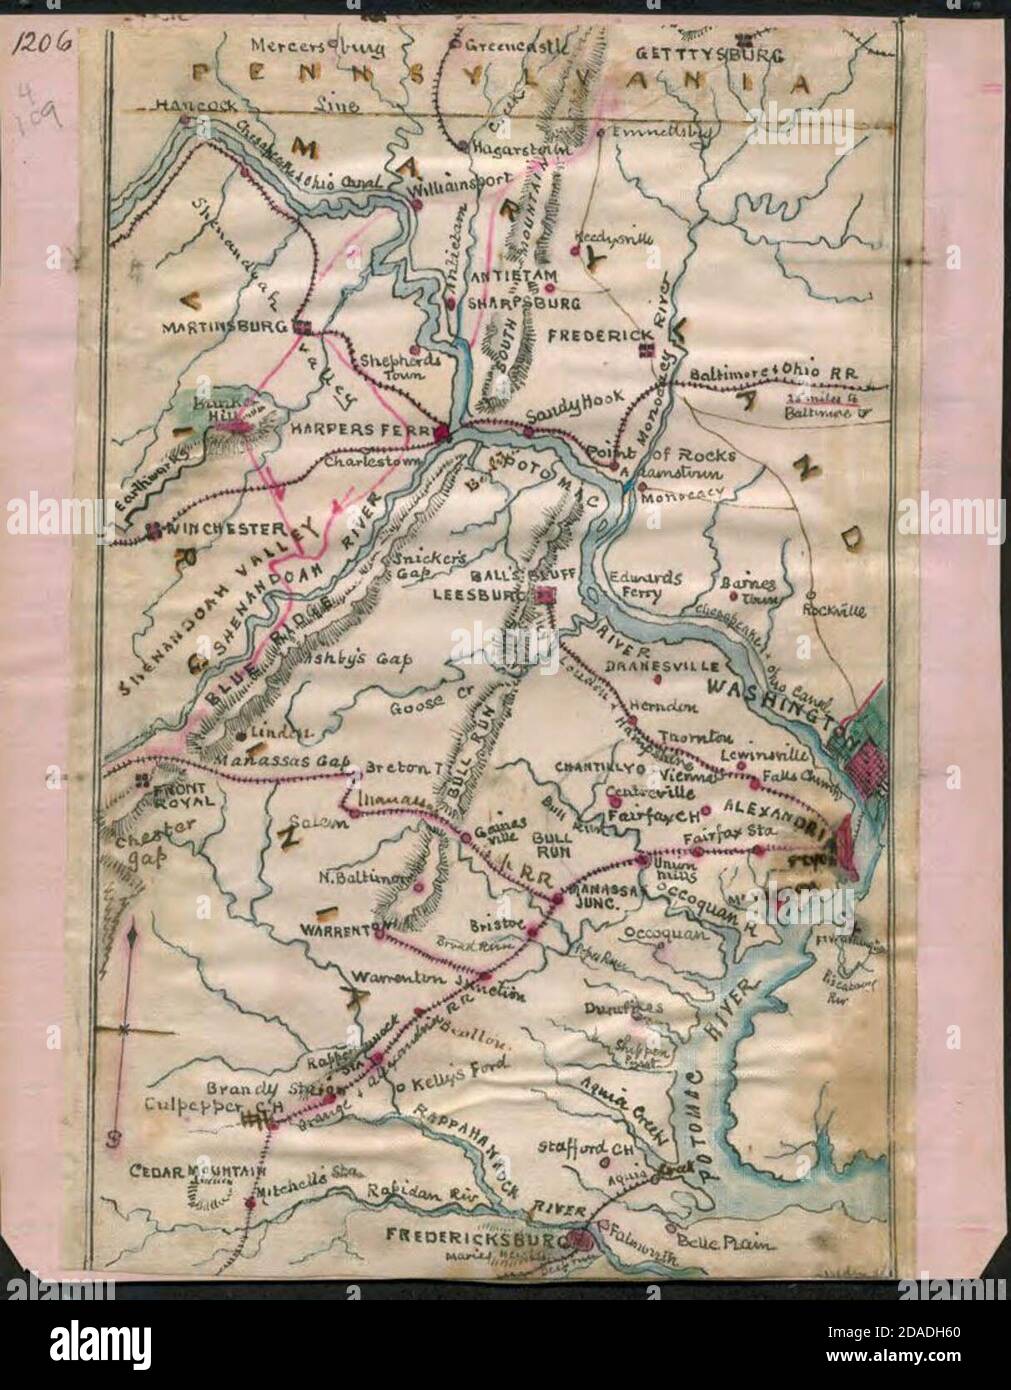 Map of the Potomac River and its environs circa 1862 by Robert Knox Sneden. Stock Photo